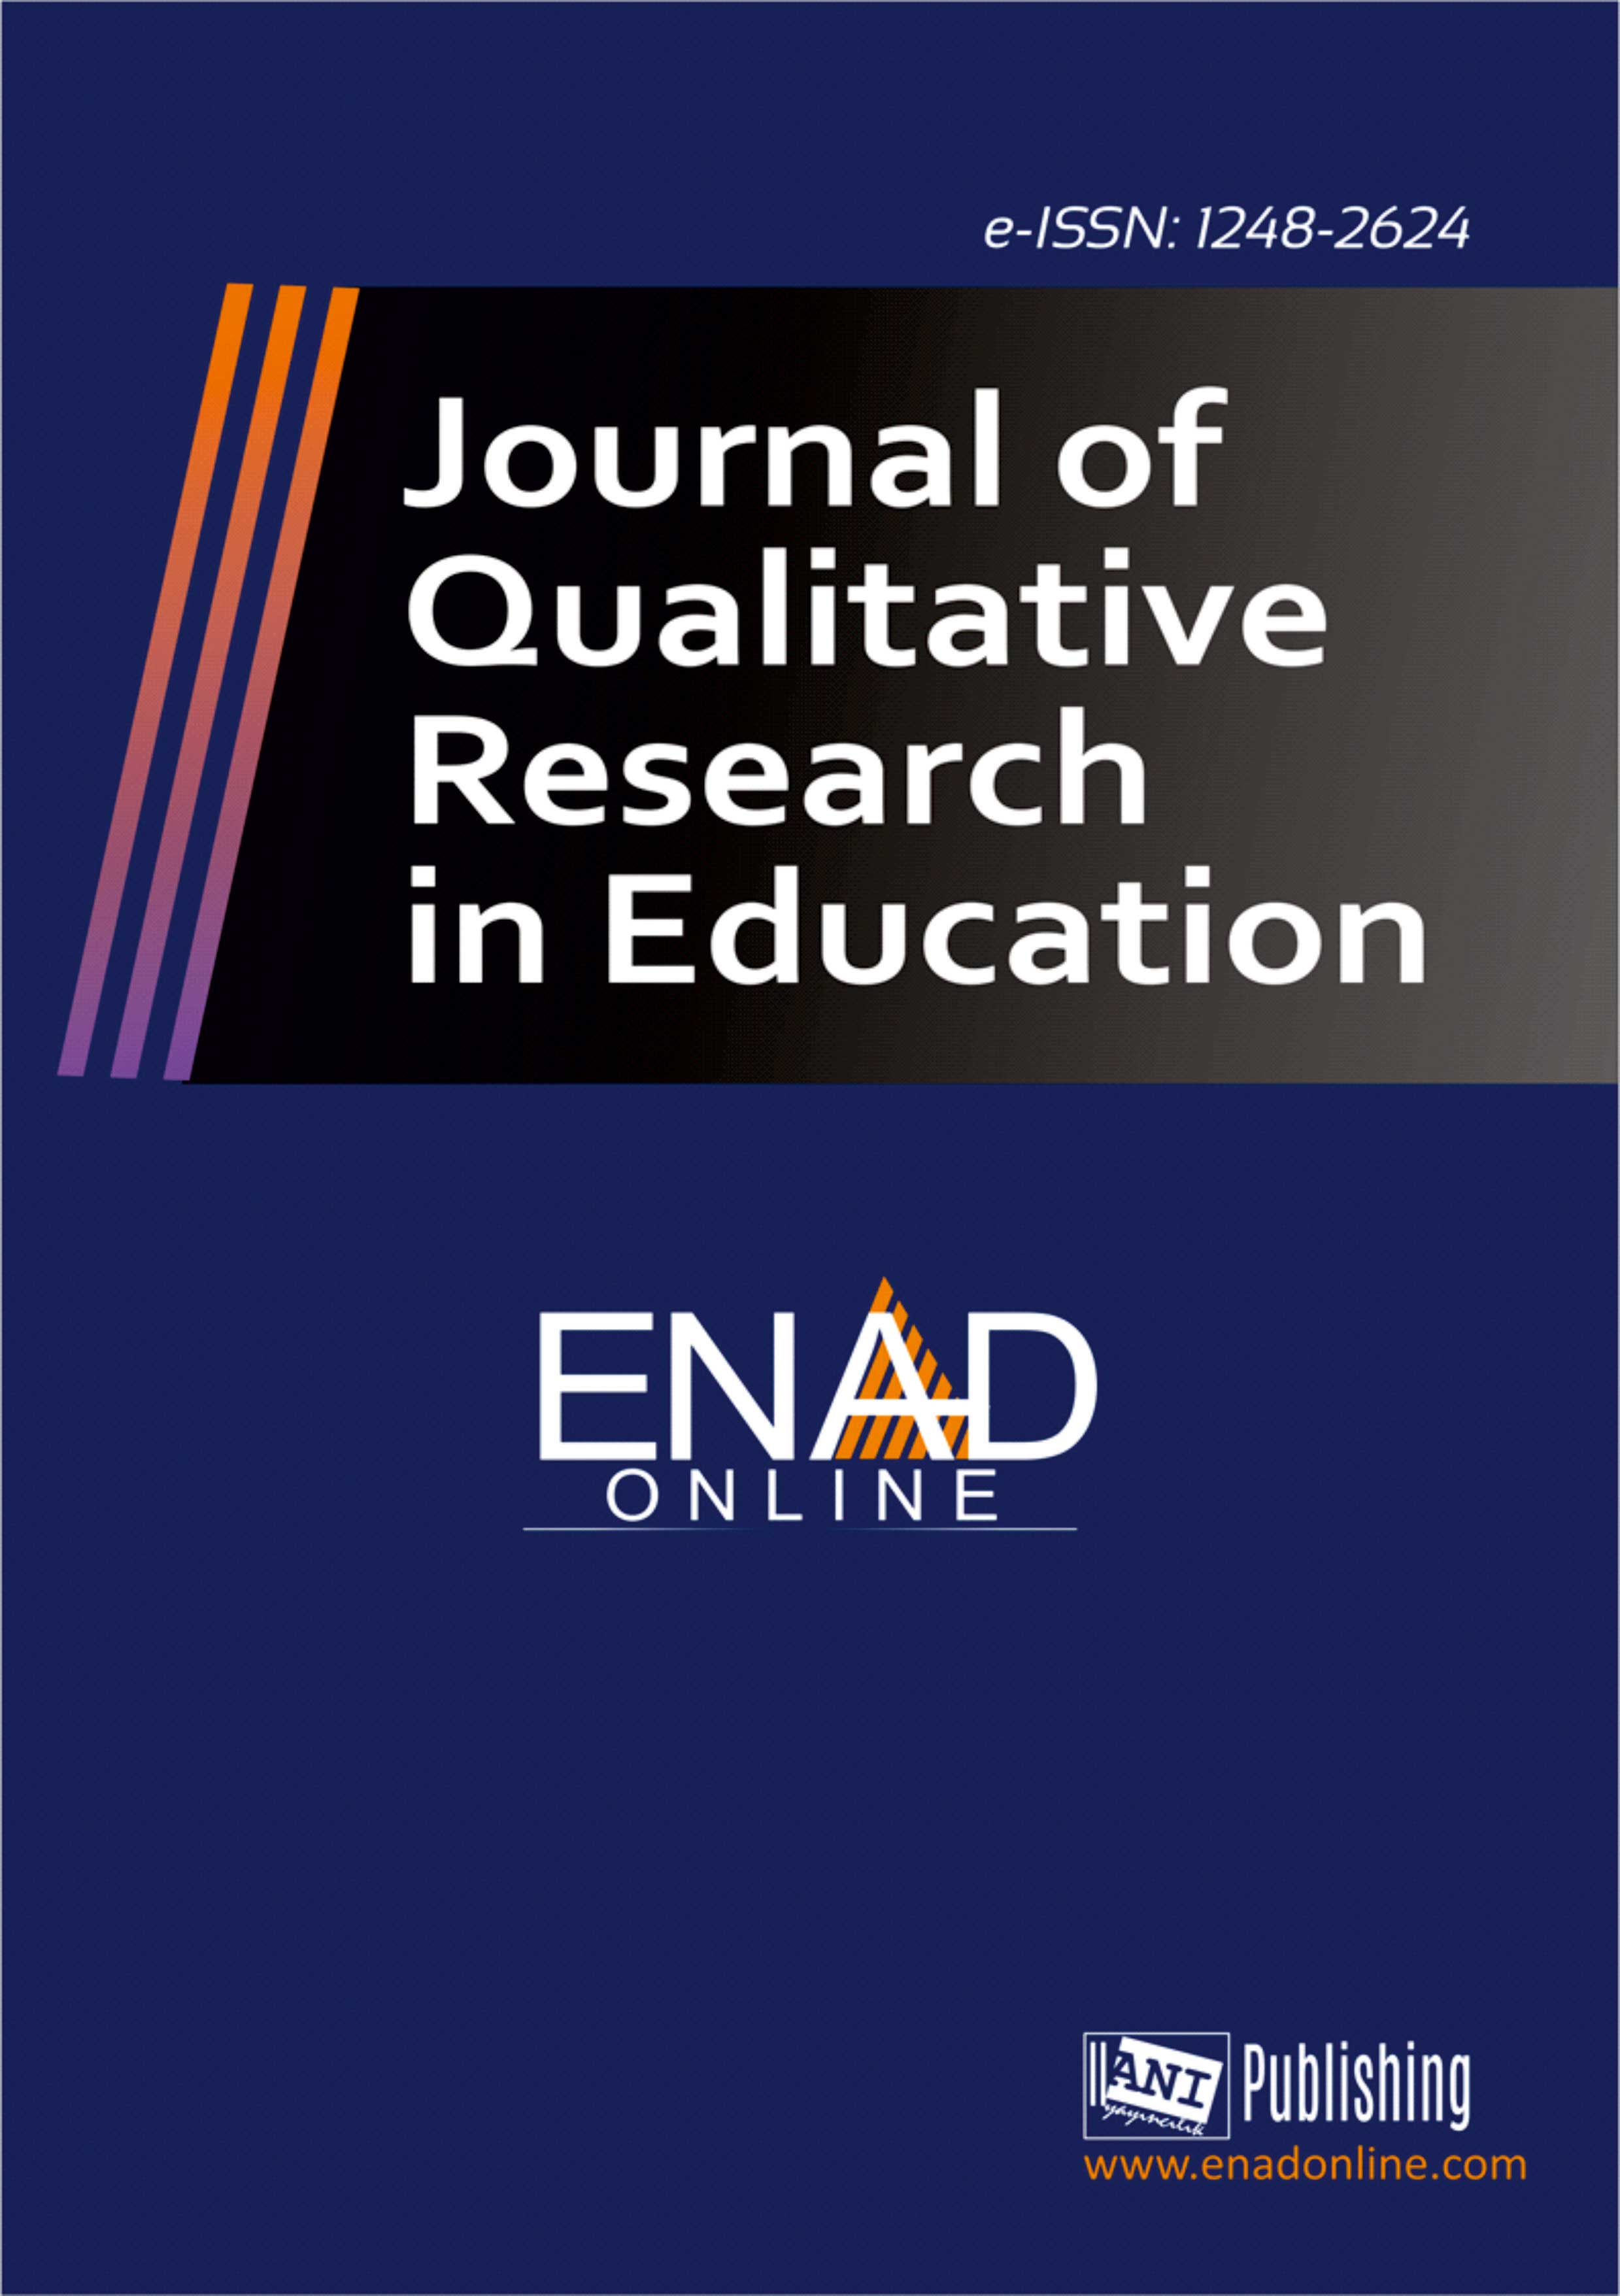 					View Vol. 4 Issue 2 (2016): Journal of Qualitative Research in Education
				